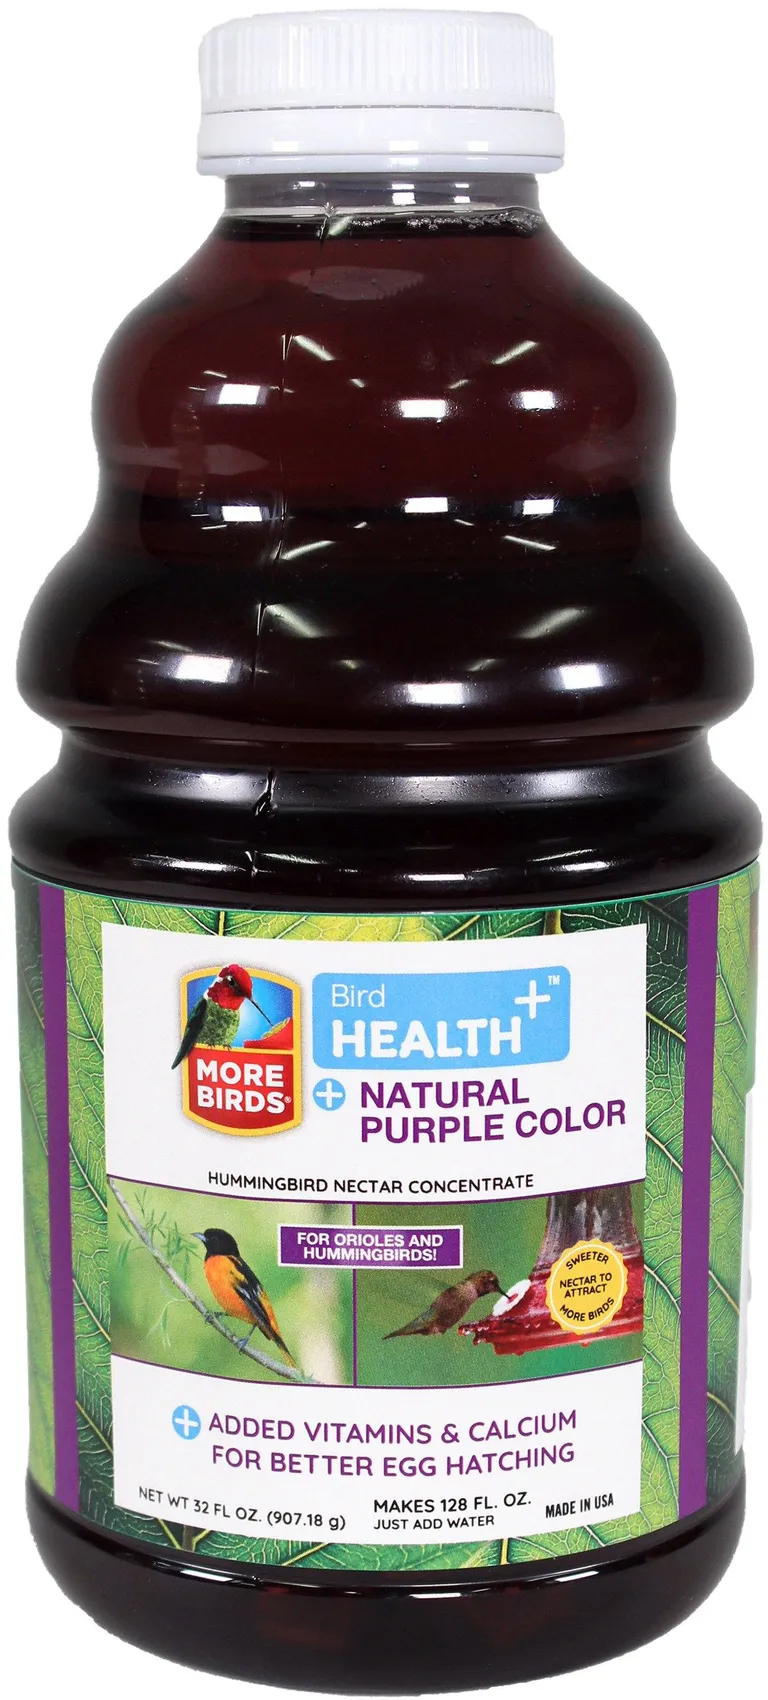 More Birds Health Plus Natural Purple Oriole and Hummingbird Nectar Concentrate Photo 1